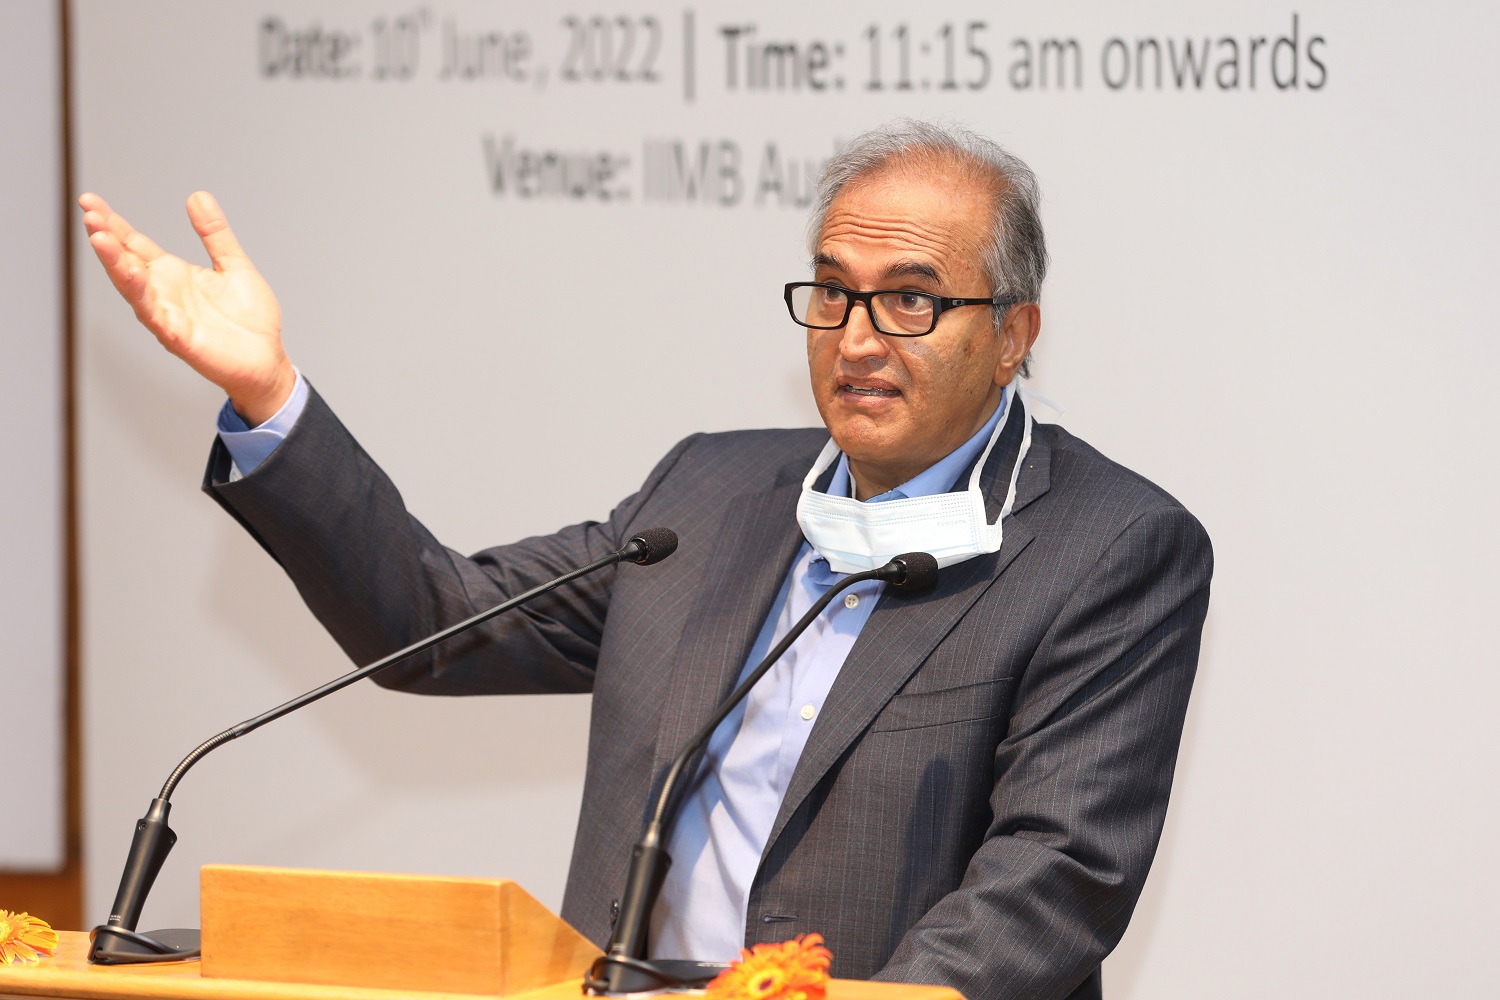 Dr. Devi Prasad Shetty, Chairperson, Board of Governors, IIMB, talks about the power of start-ups incubated at academic institutions like the IITs and the IIMs in the context of ‘Atmanirbhar Bharat’.